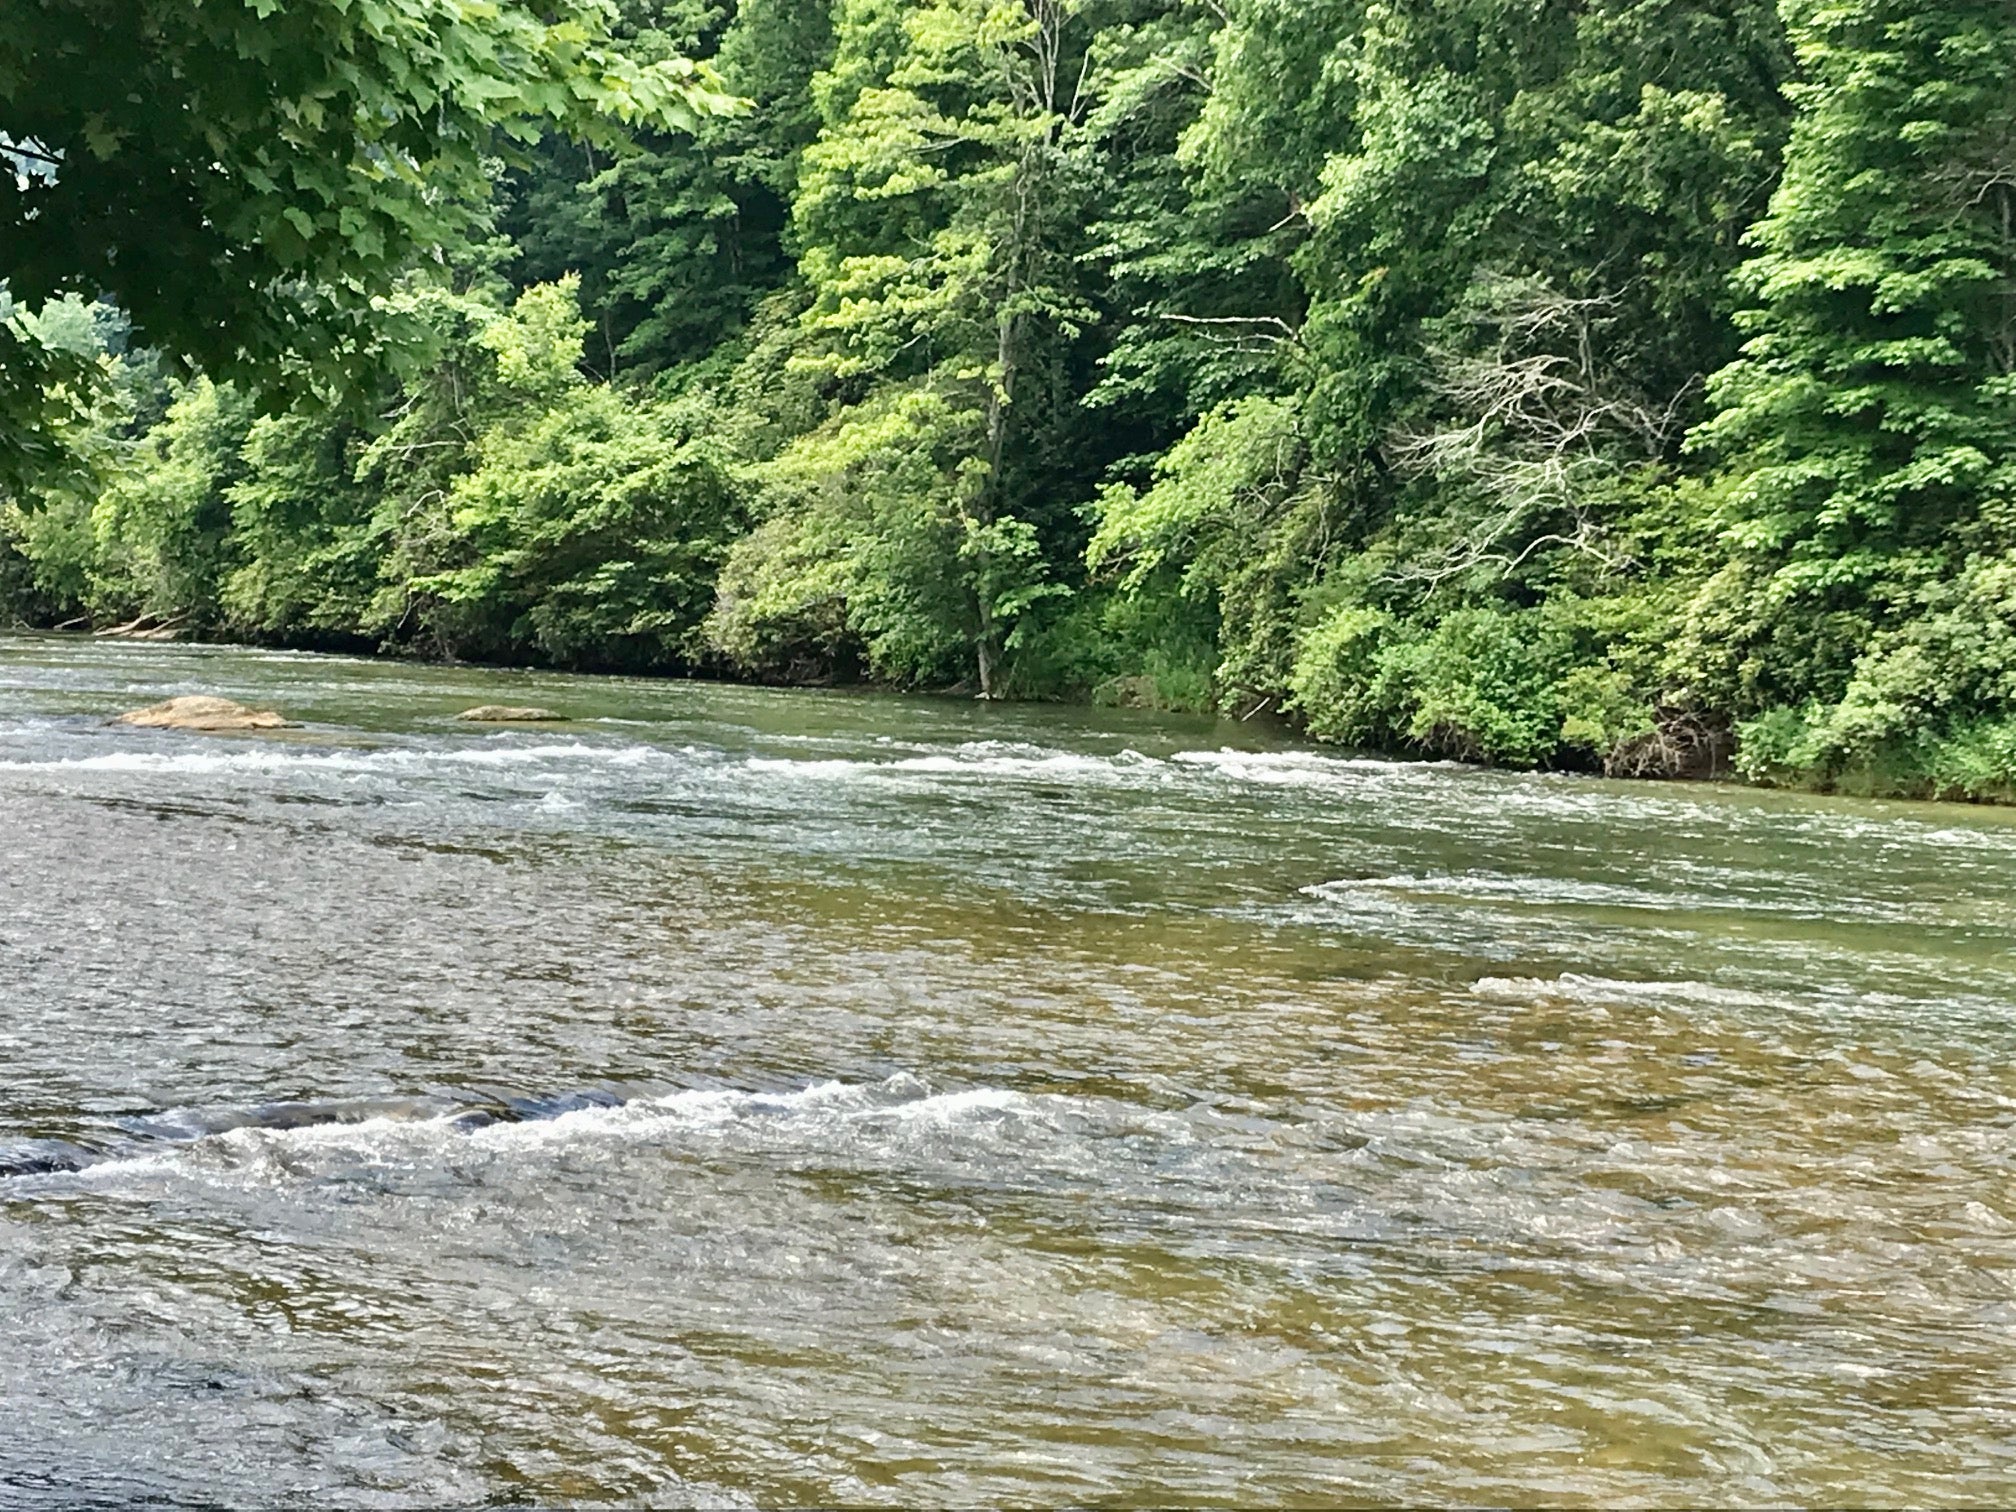 Enjoy the sounds of the river right next to your site.